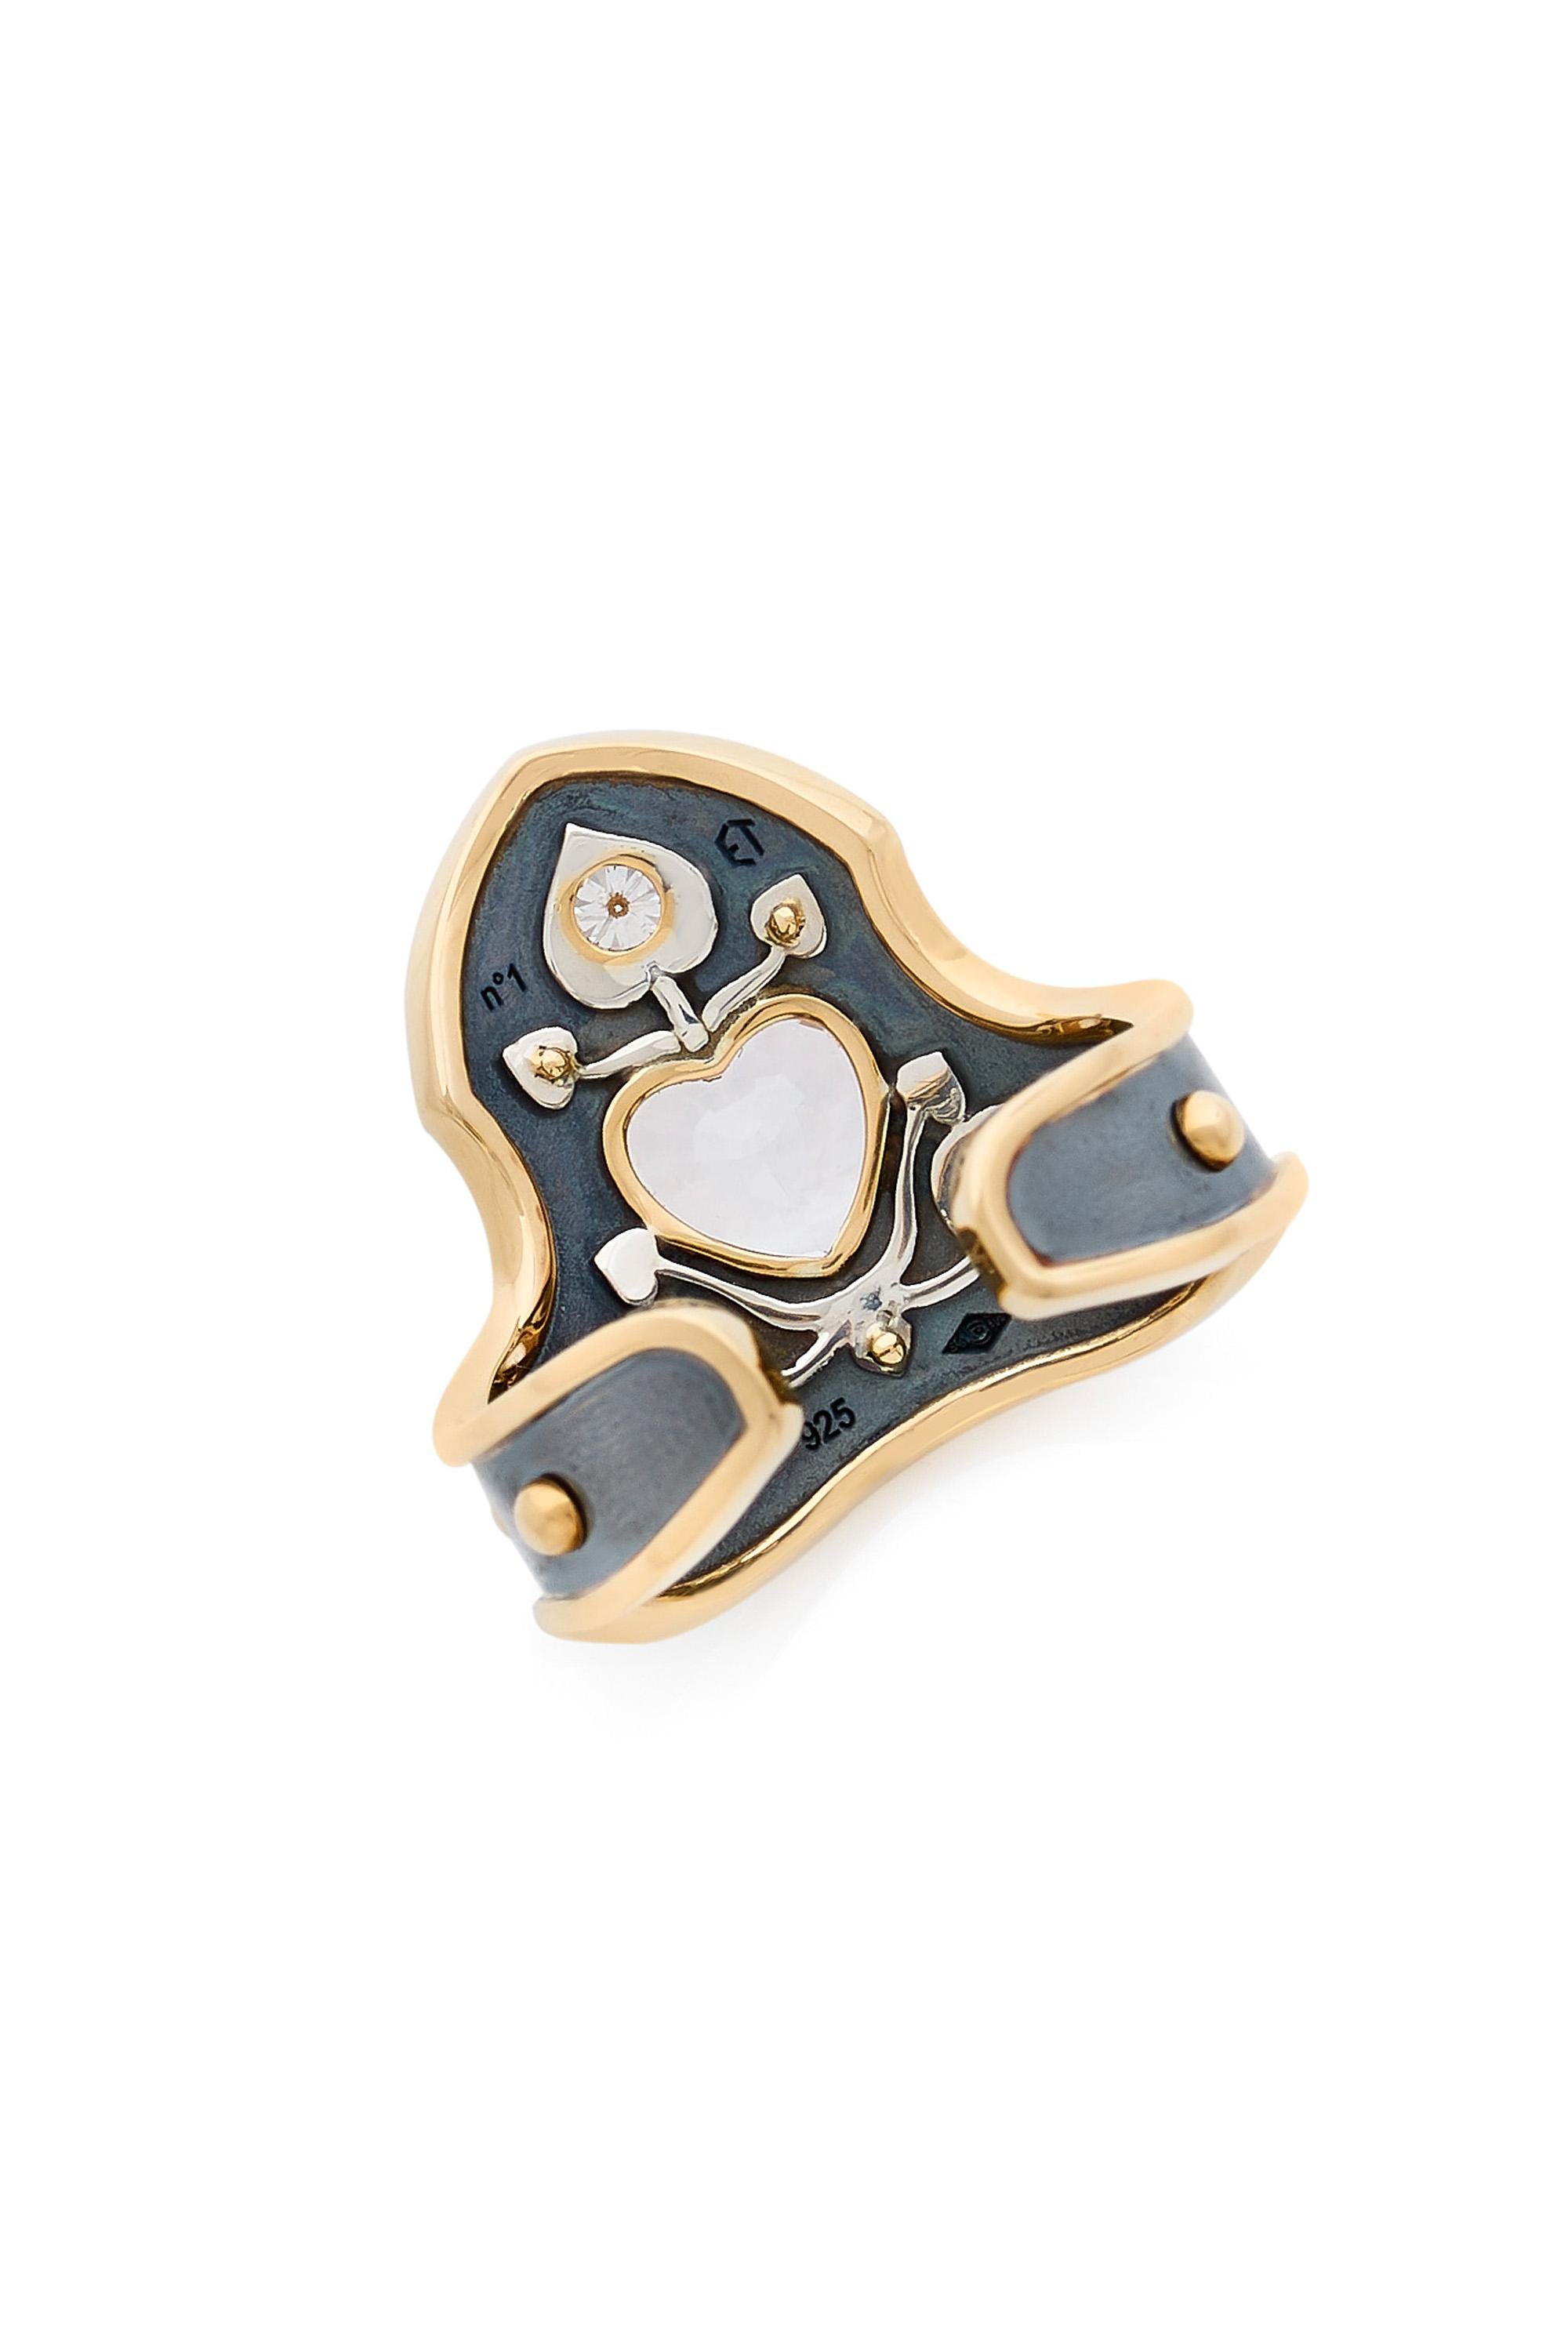 Neoclassical White Sapphire Heart Blason Ring in 18k Yellow Gold by Elie Top